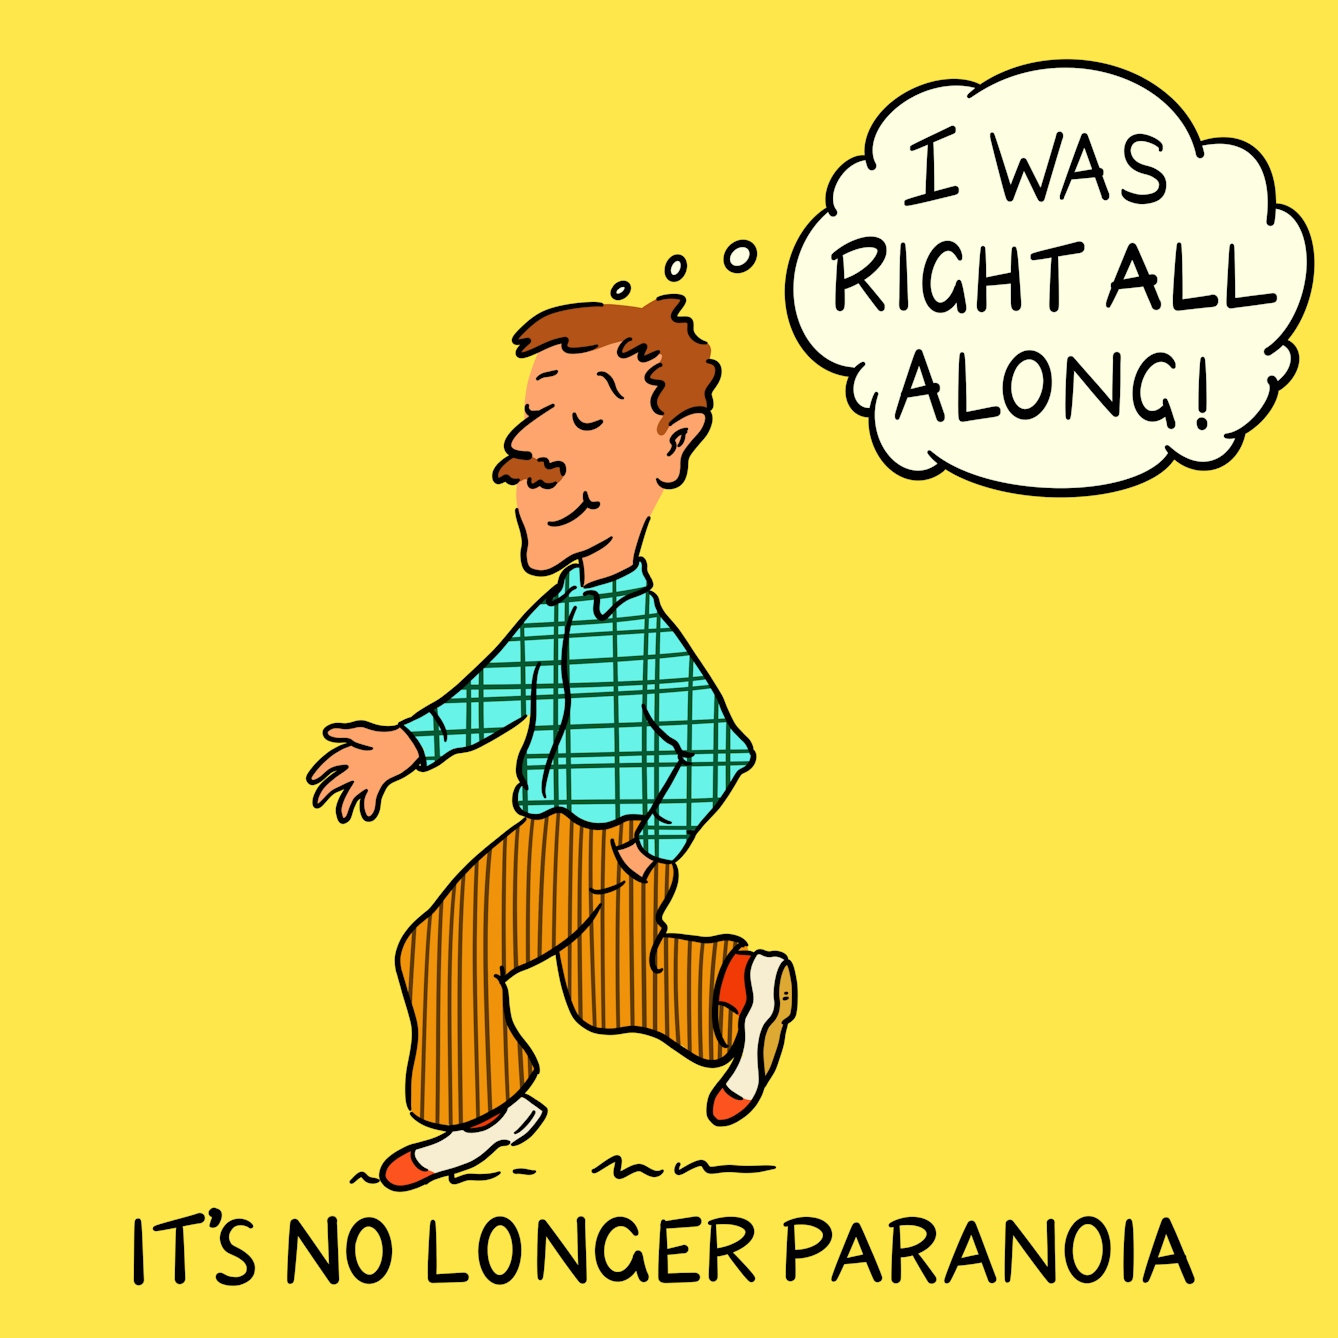 Panel 3 of a four-panel comic drawn digitally: a white man with a moustache, corduroy trousers and a plaid shirt saunters along looking smug, thinking "I was right all along!". The caption text reads "It's no longer paranoia"